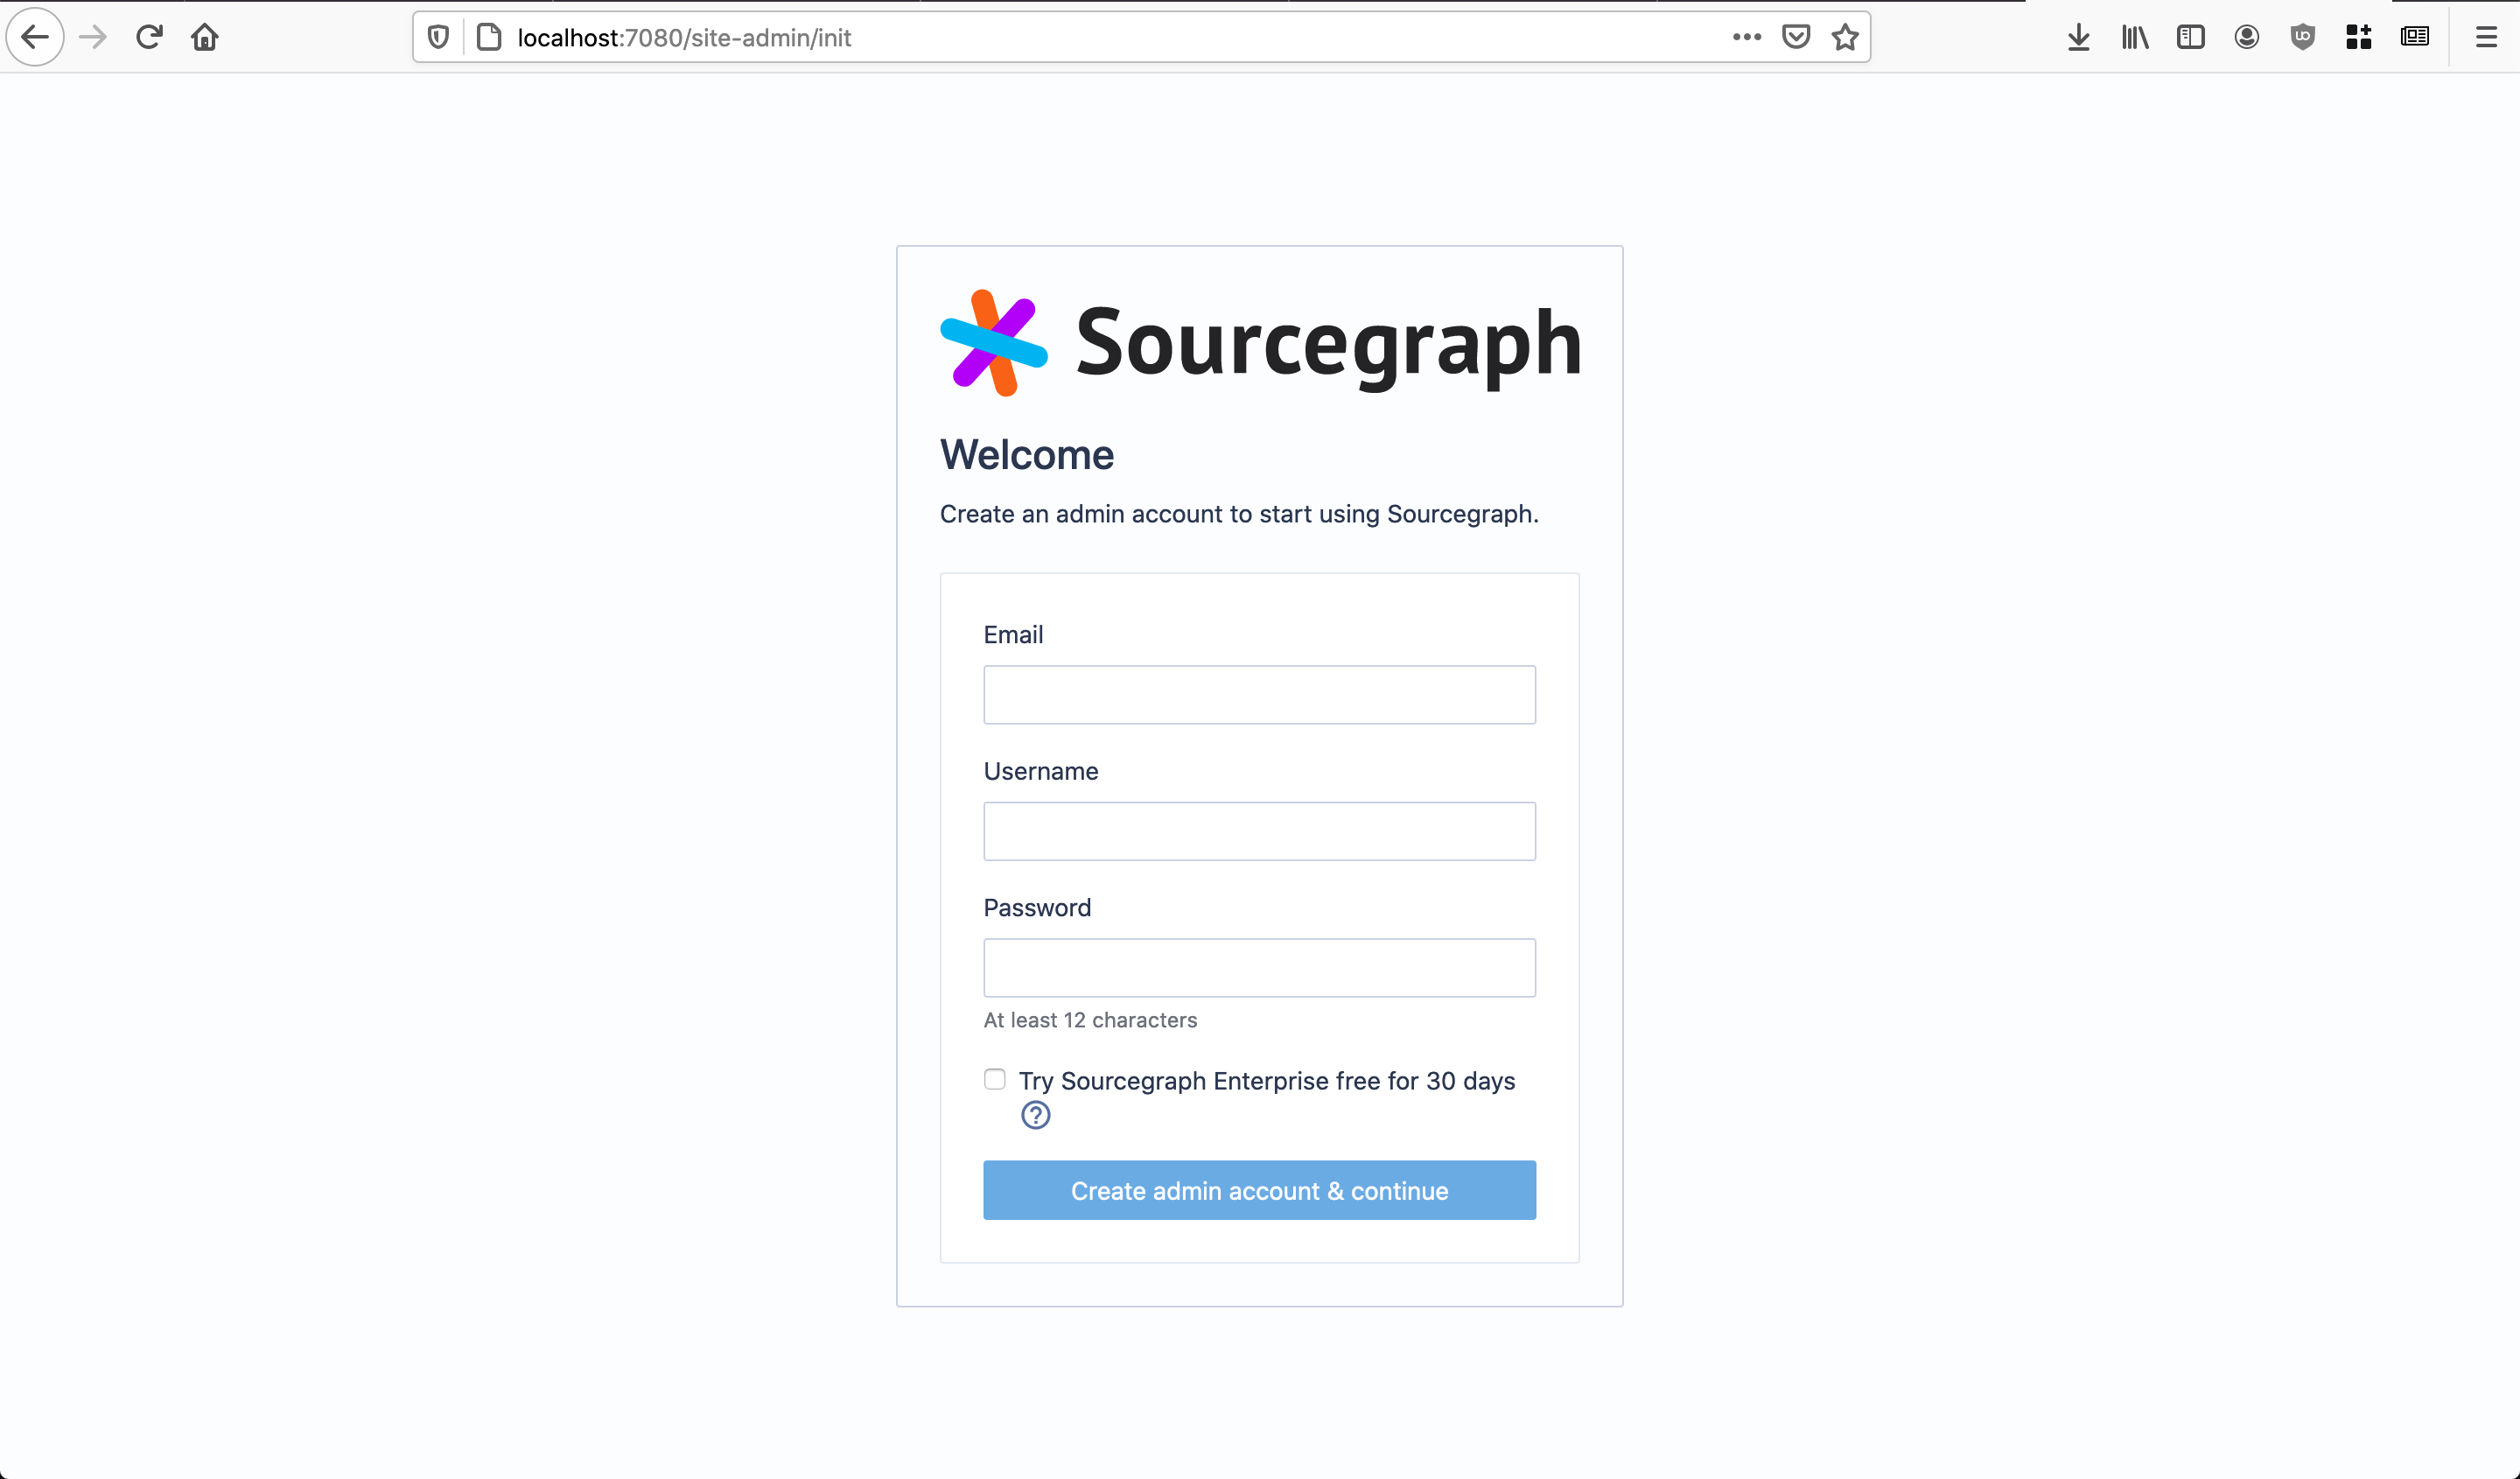 Welcome to Sourcegraph